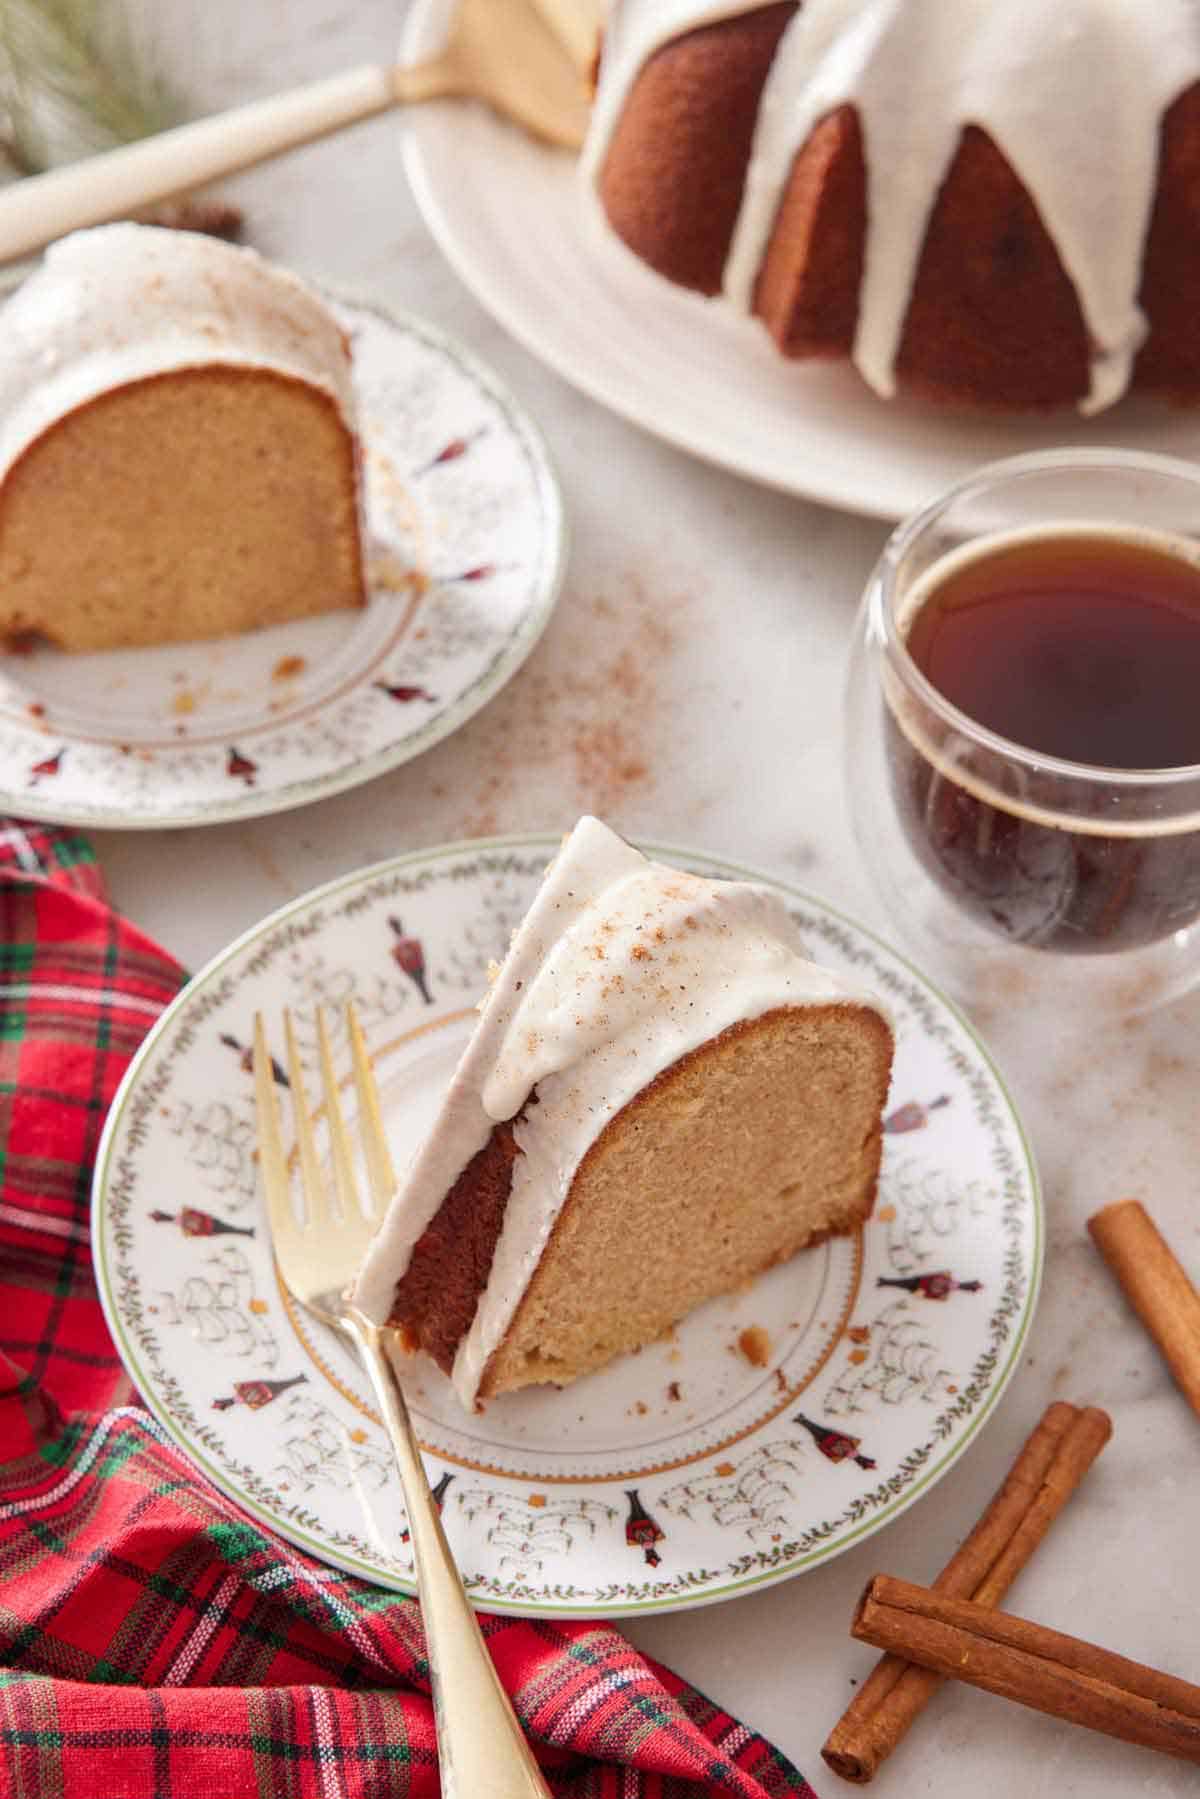 A festive plate with a slice of eggnog cake with a fork on the plate. Cinnamon sticks around it along with another plated slice, a drink, and the rest of the cake.